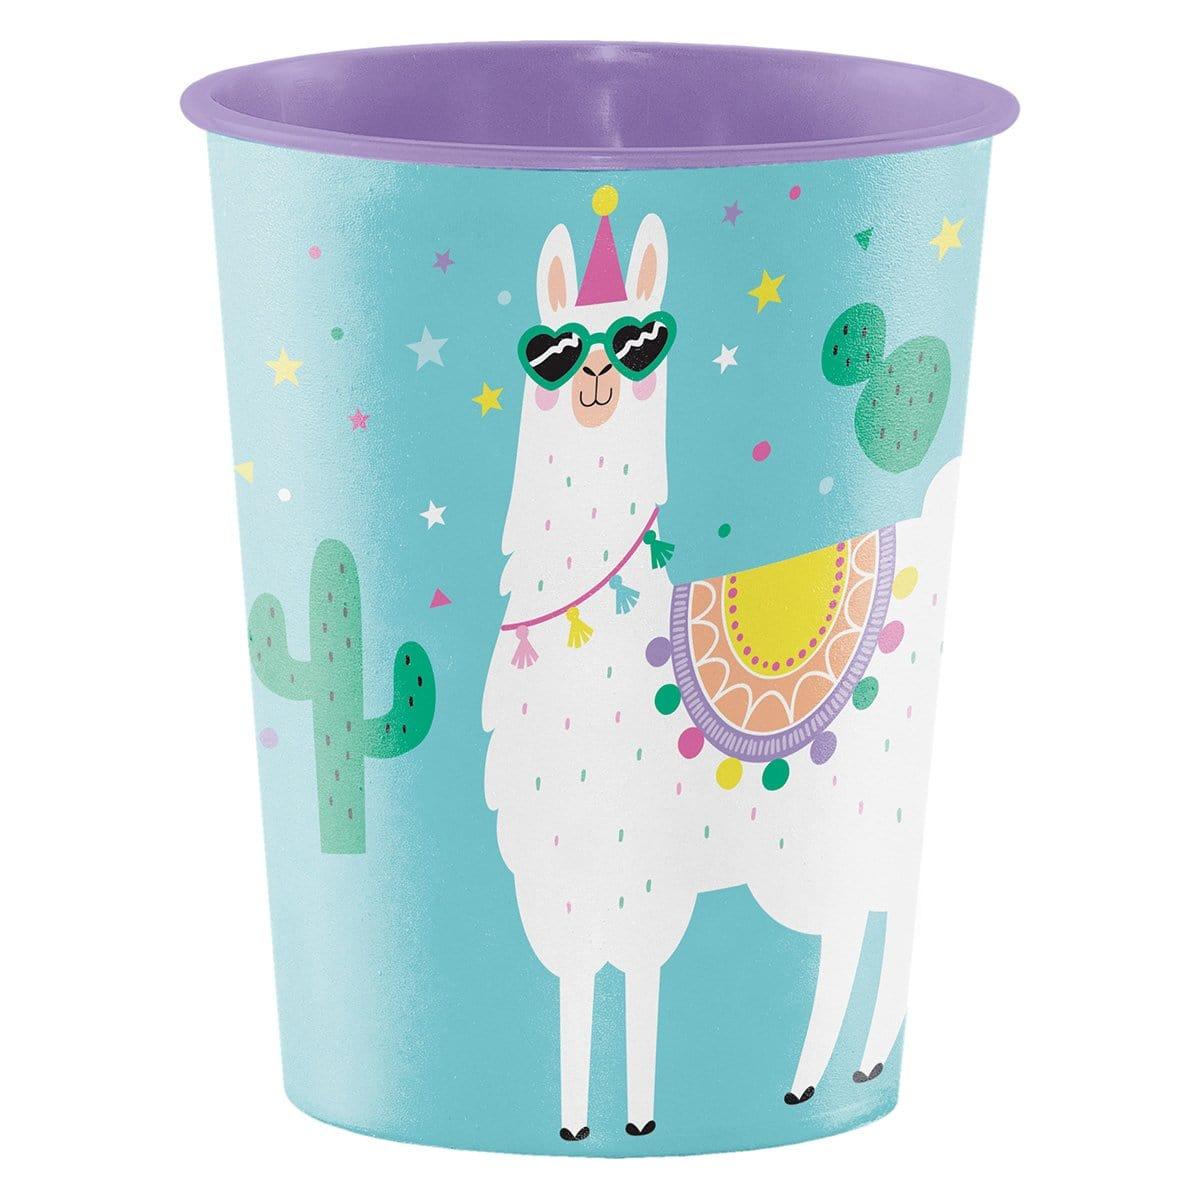 Buy Kids Birthday Llama Party plastic favor cup sold at Party Expert